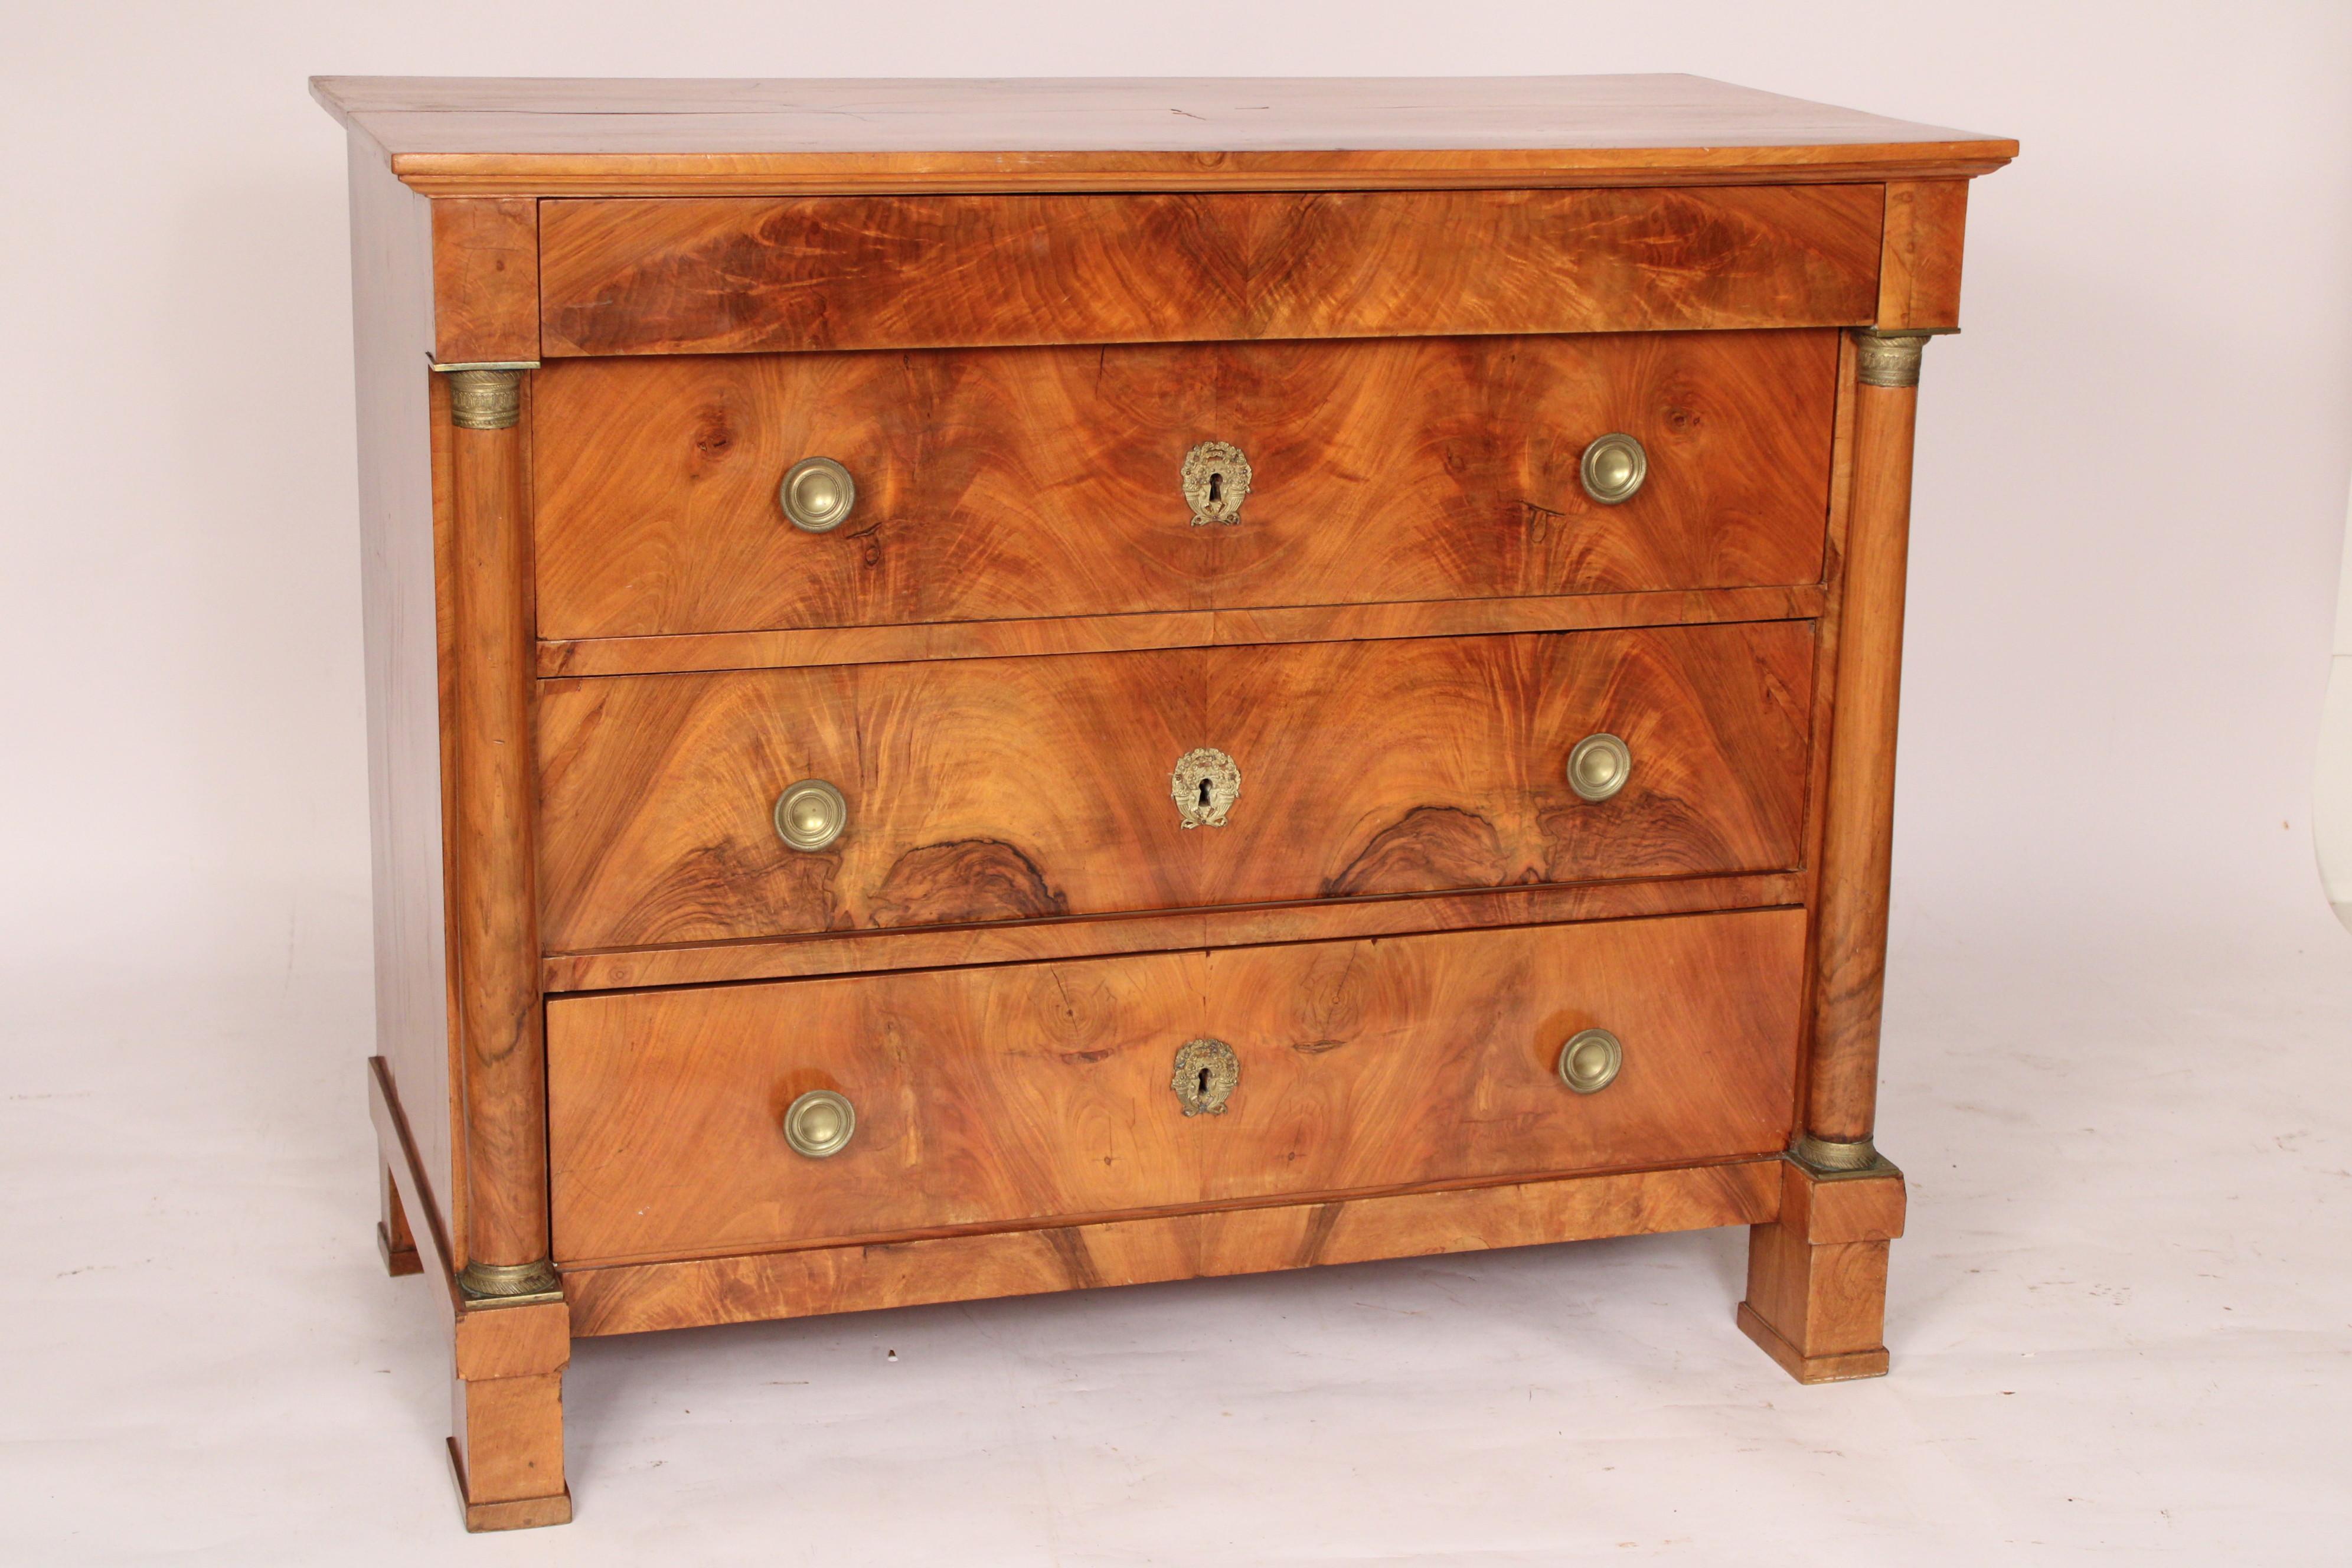 European Antique Empire Style Burl Walnut Chest Of Drawers For Sale